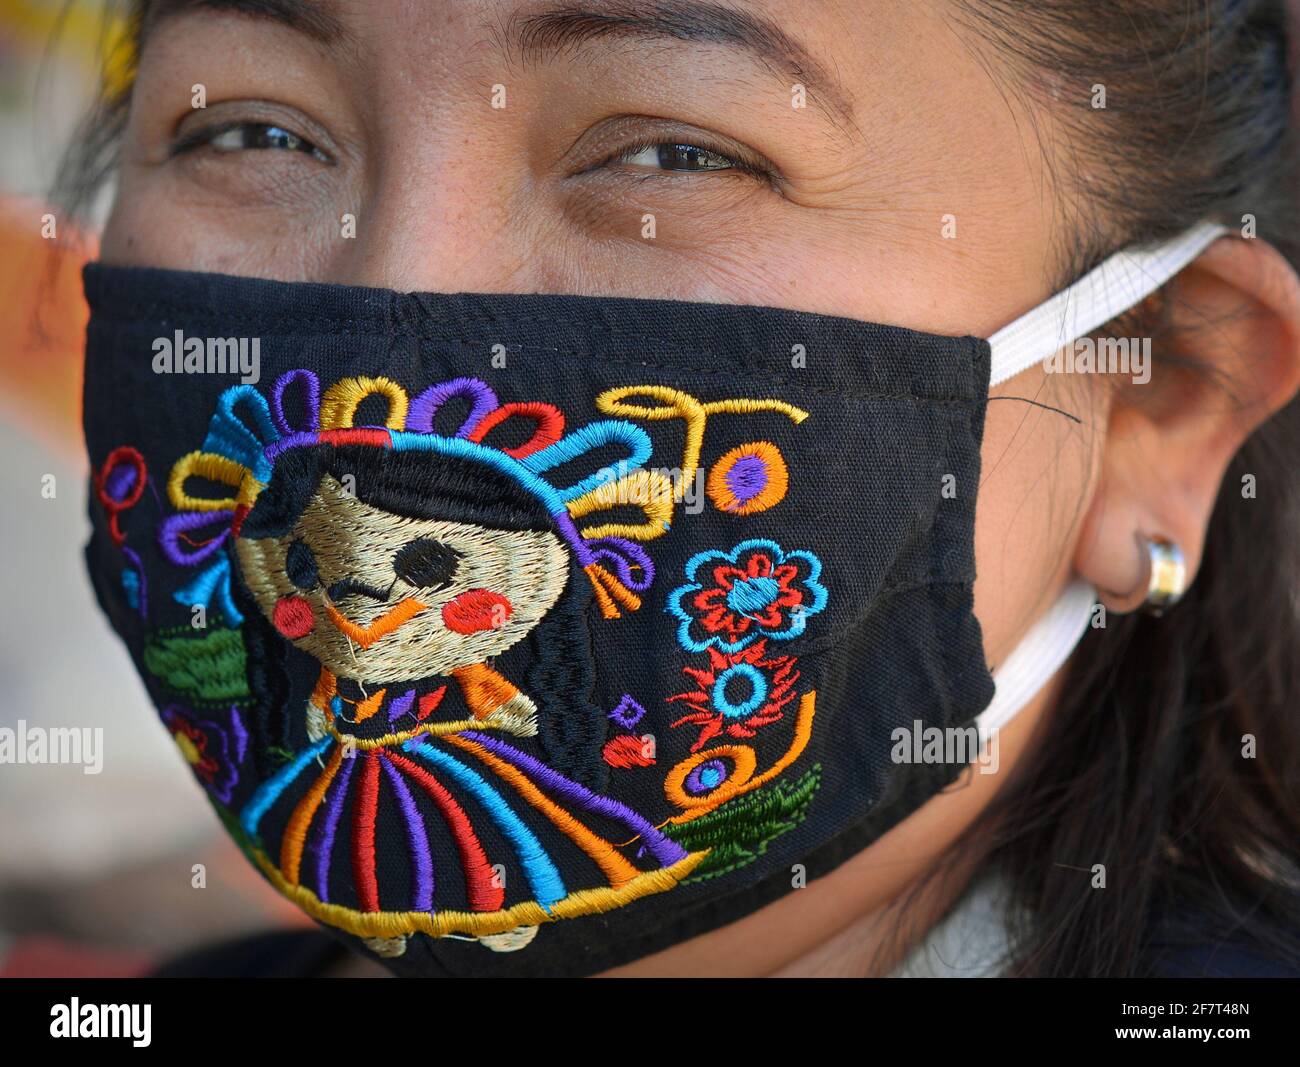 Mexican woman with smiling eyes wears a colorful washable embroidered cloth face mask and looks at the camera, during the global coronavirus pandemic. Stock Photo